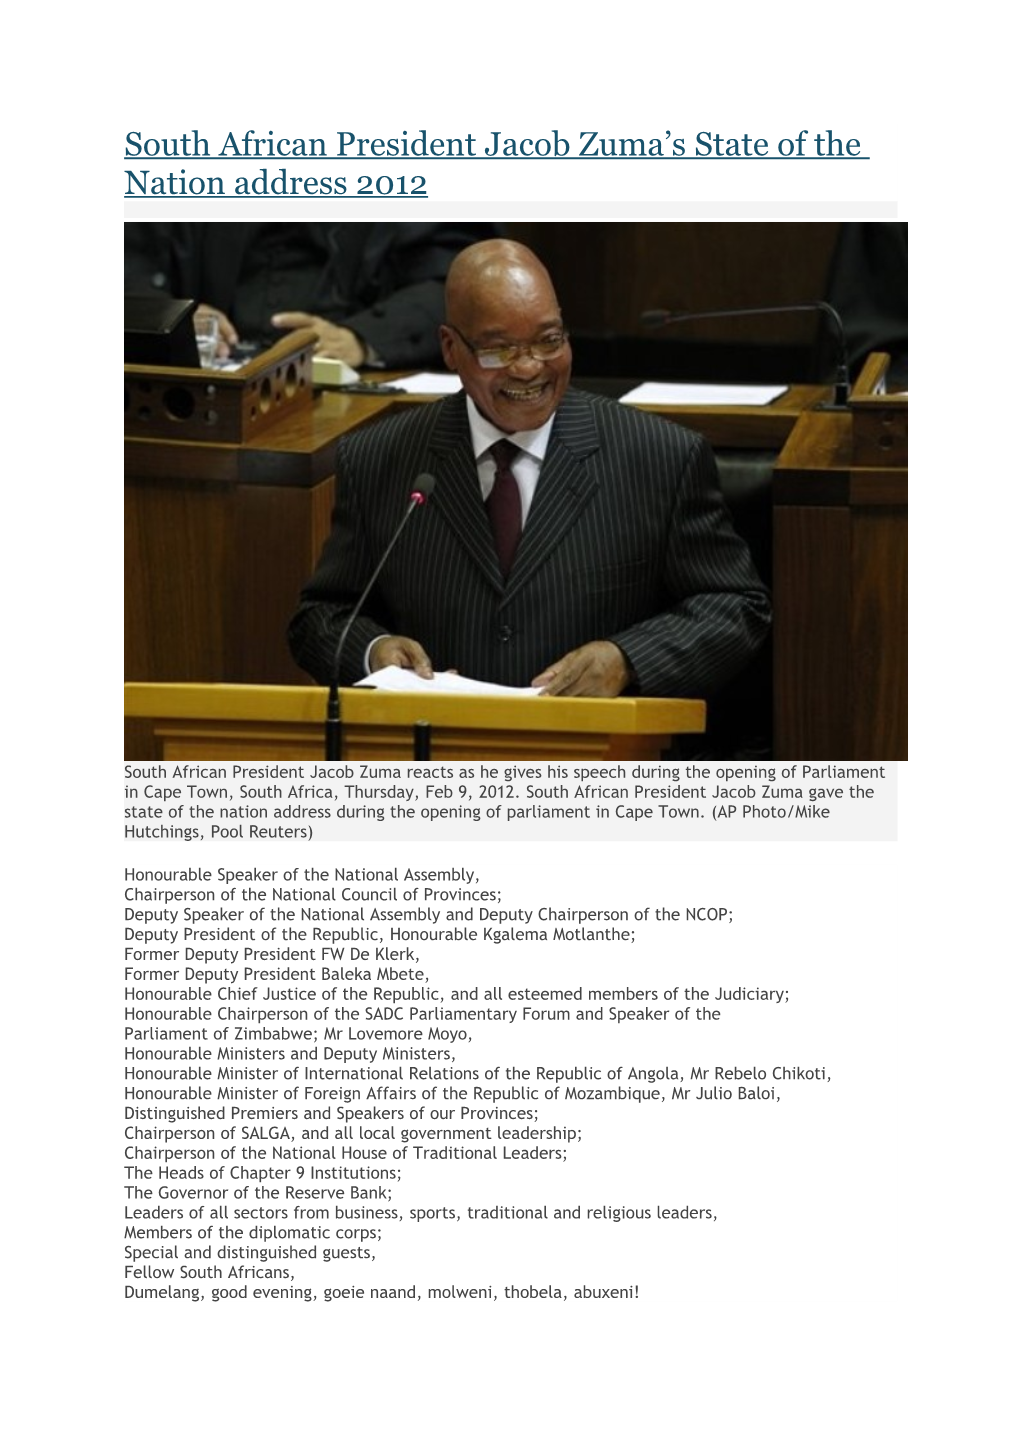 South African President Jacob Zuma S State of the Nation Address 2012